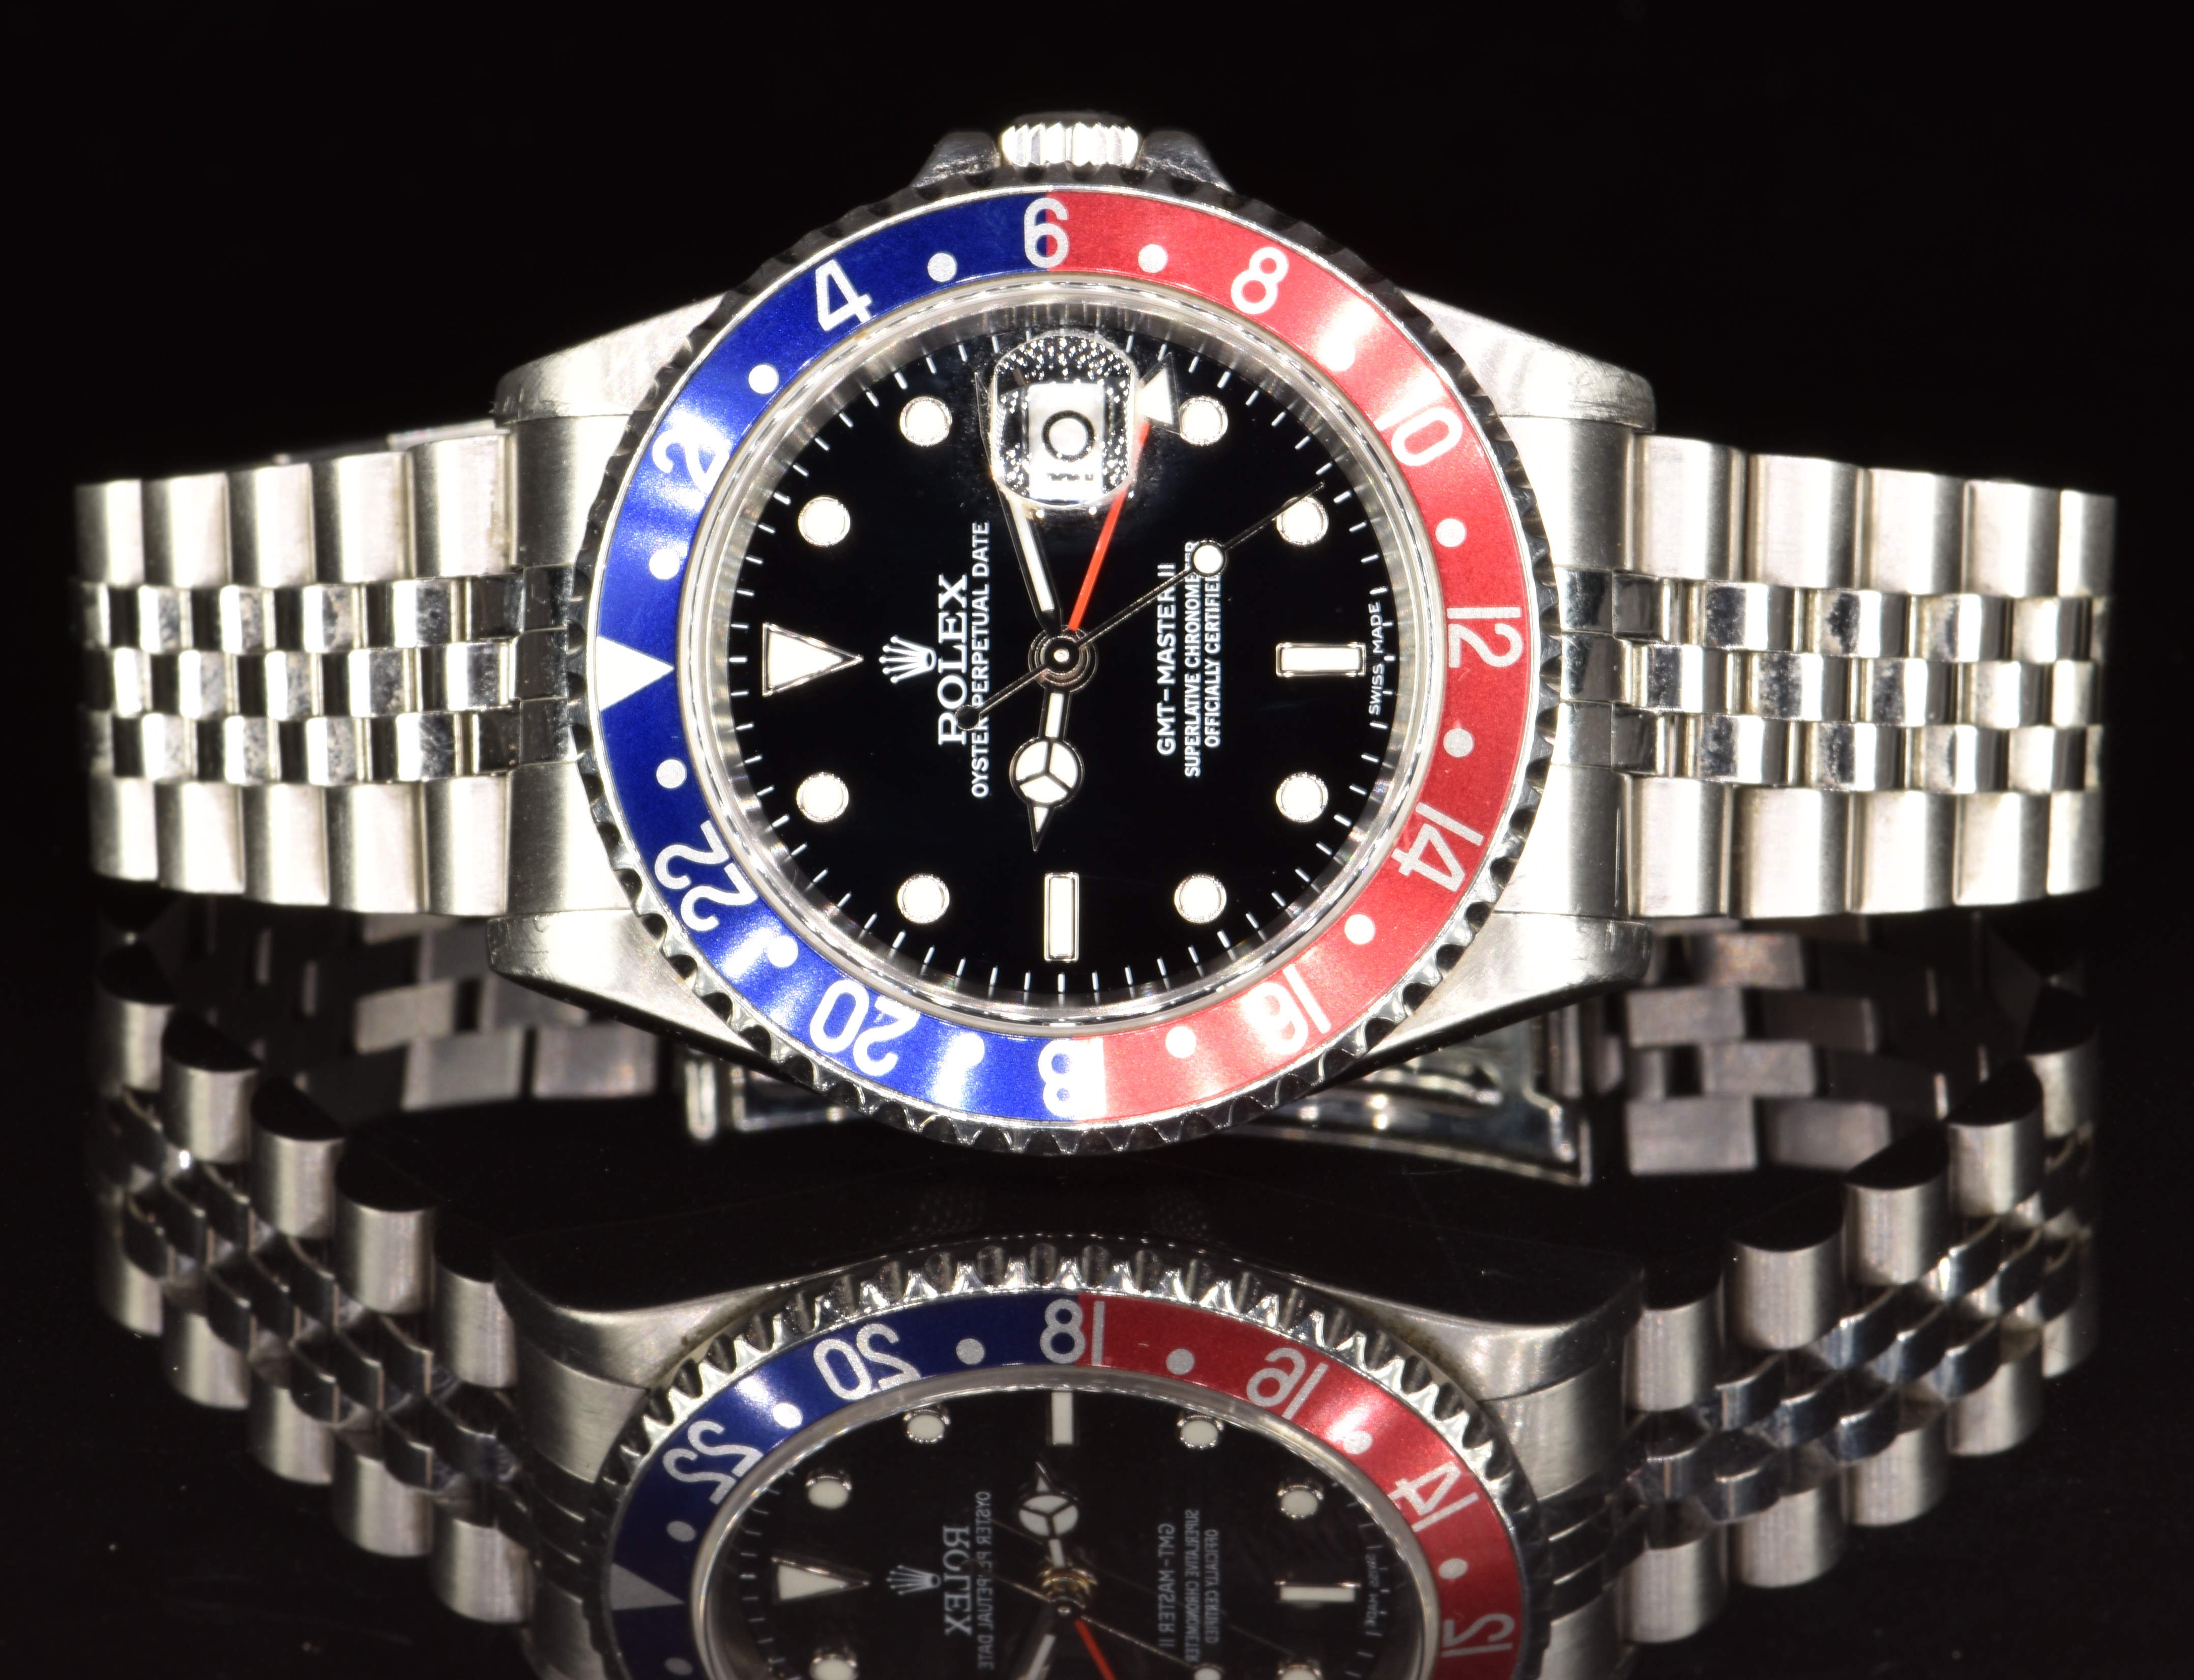 Rolex Oyster Perpetual Date GMT Master II 'Pepsi' gentleman's automatic wristwatch ref. 16710 T, - Image 2 of 8